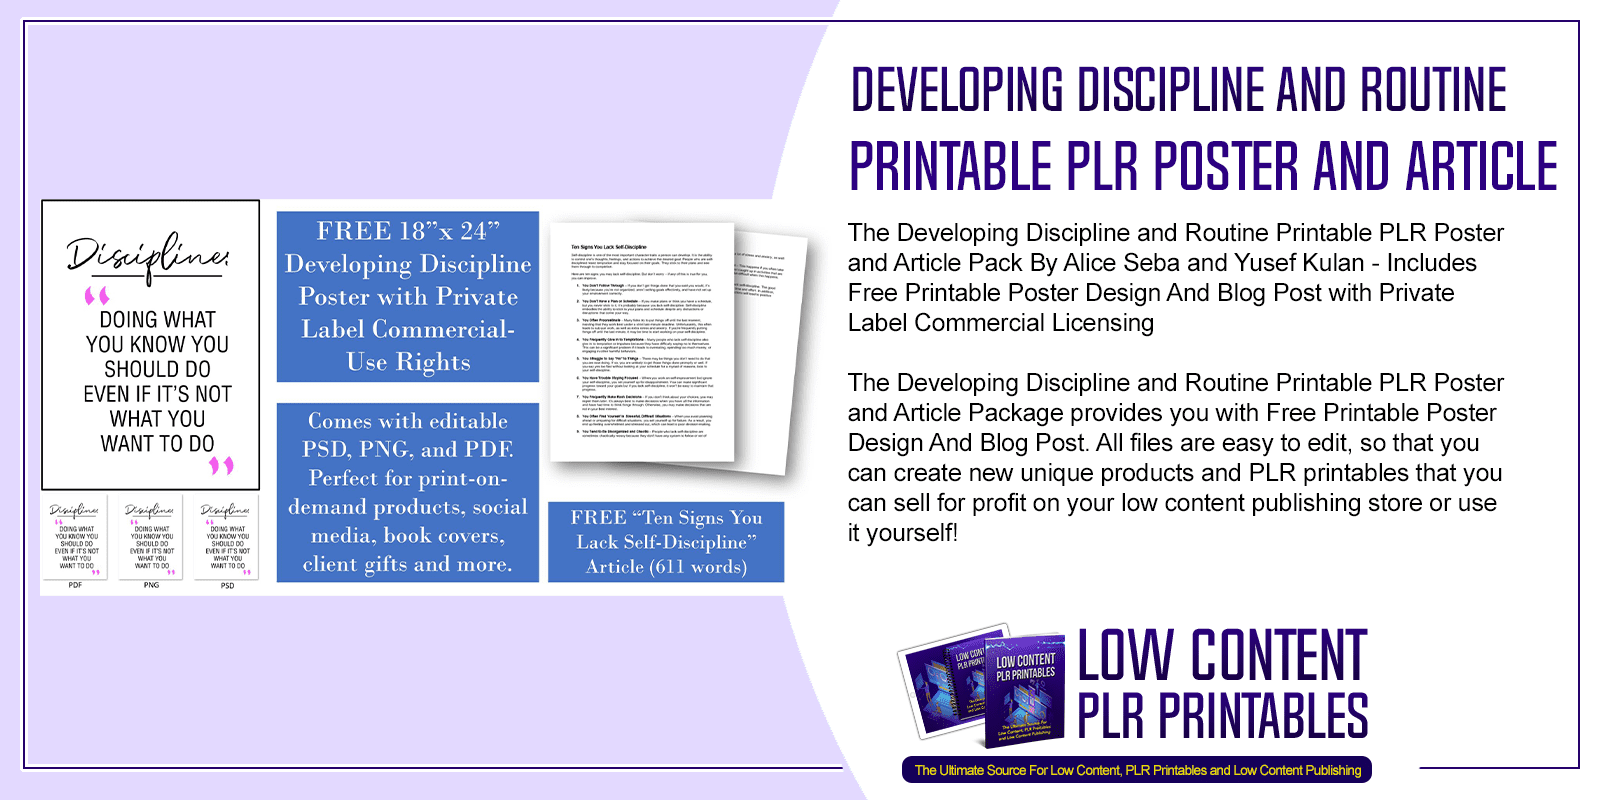 Developing Discipline and Routine Printable PLR Poster and Article